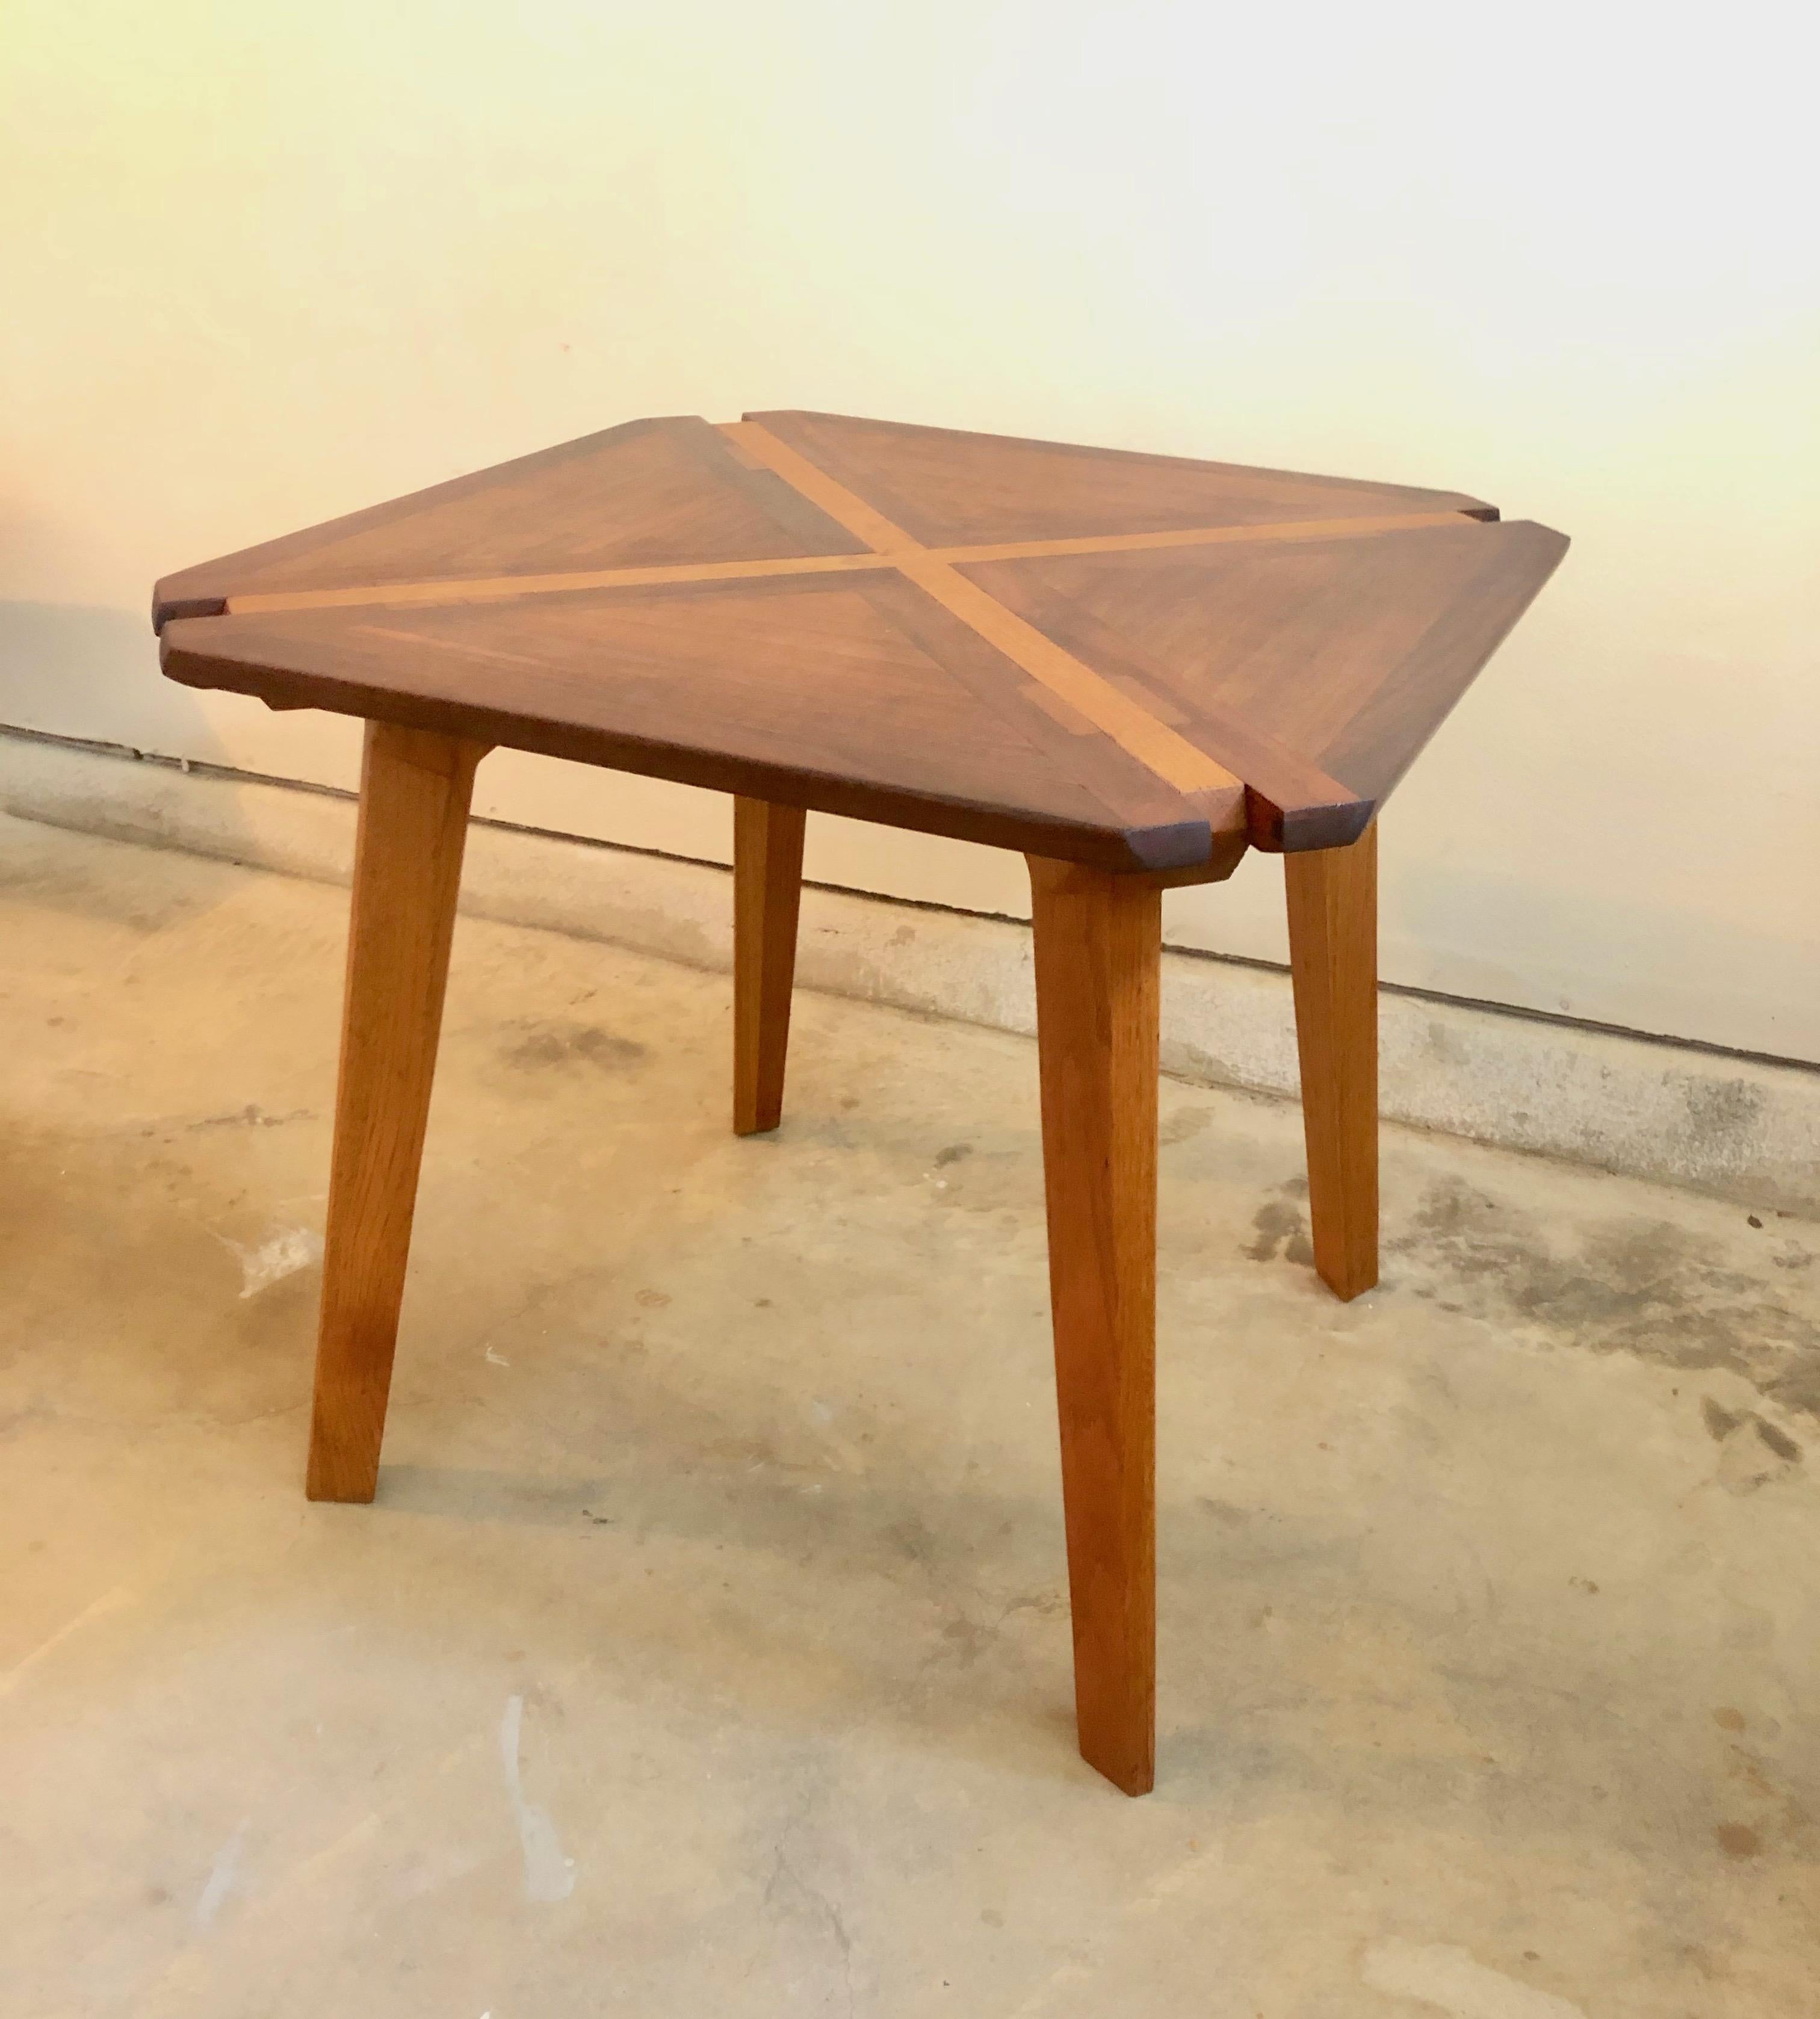 Studio Crafted Mixed Woods Dining Table / Game Table 6